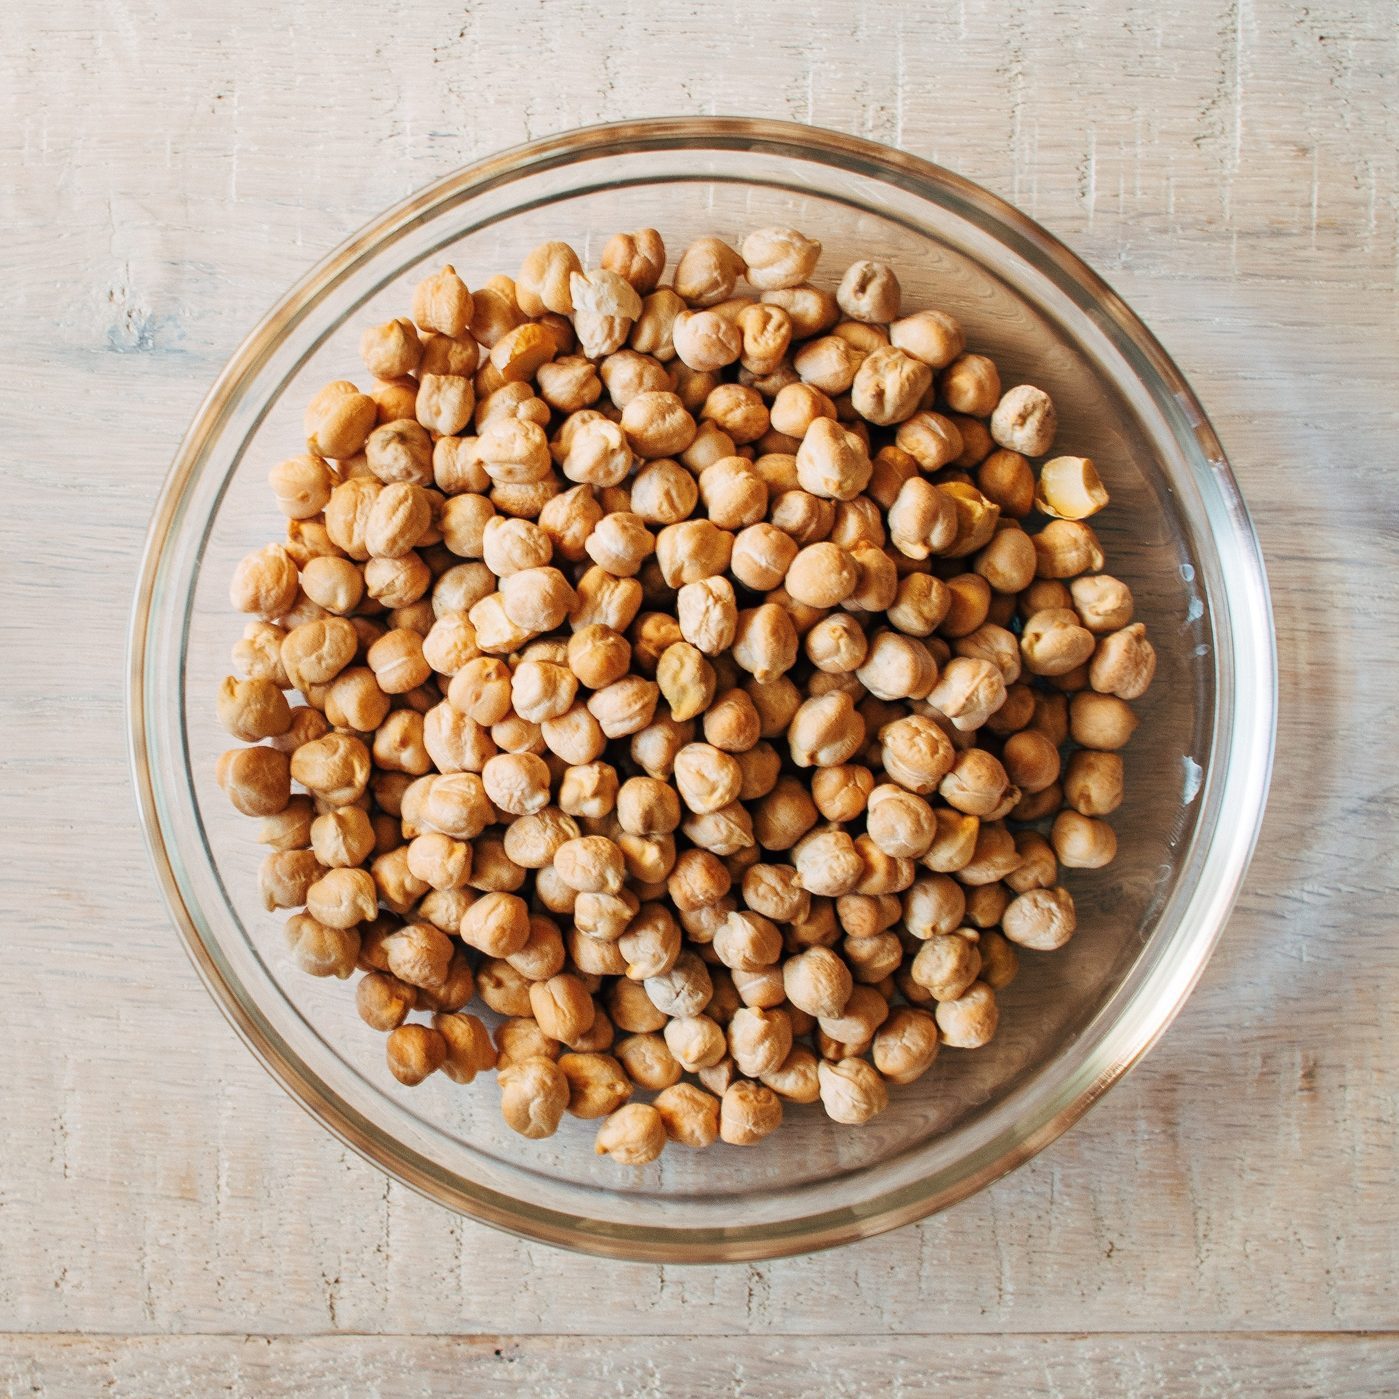 What to Know About Chickpea Nutrition, Benefits, and How to Cook Them